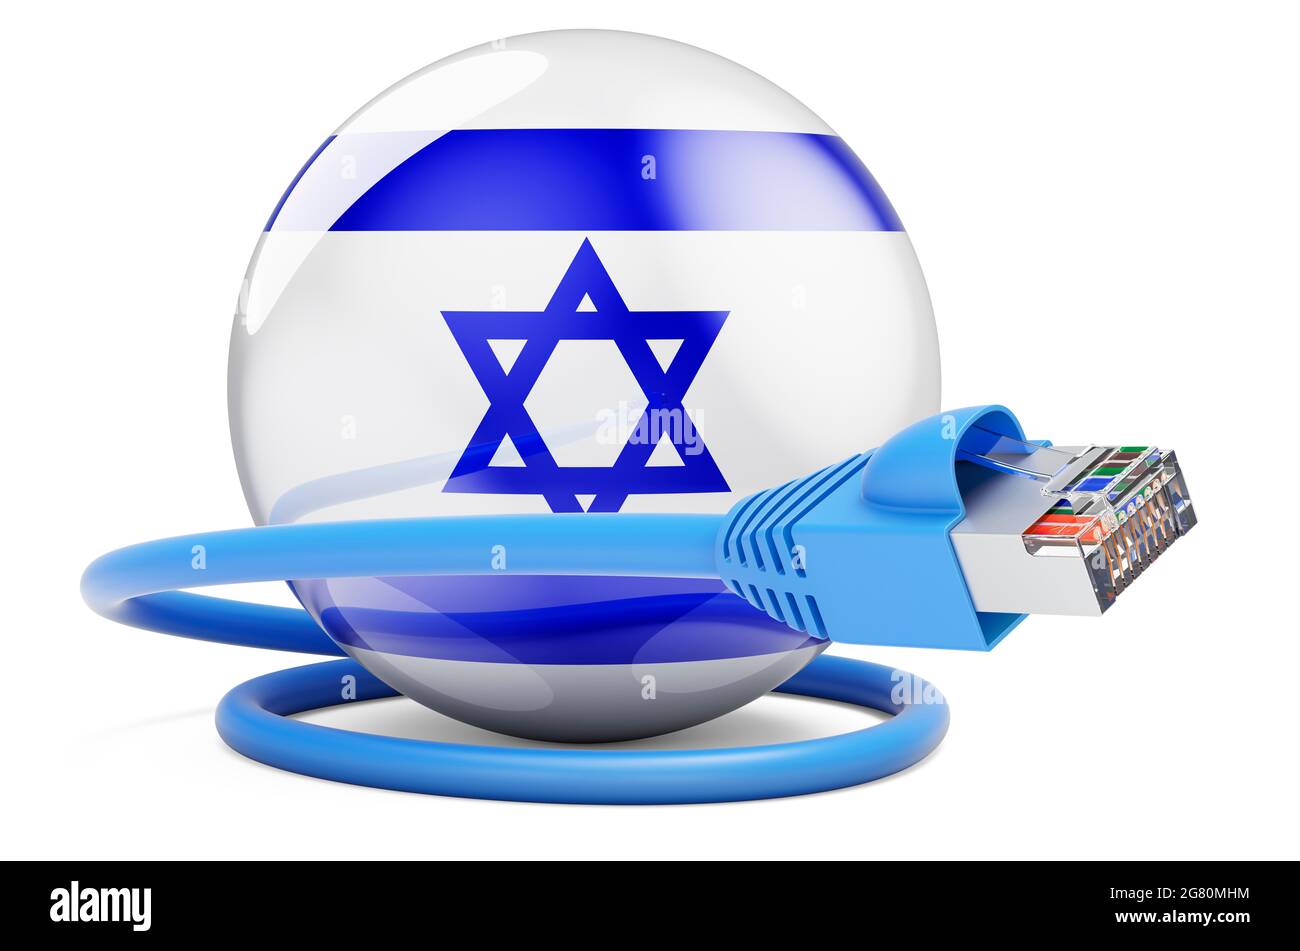 Internet Connection In Israel Lan Cable With Israeli Flag 3d Rendering Isolated On White 9749